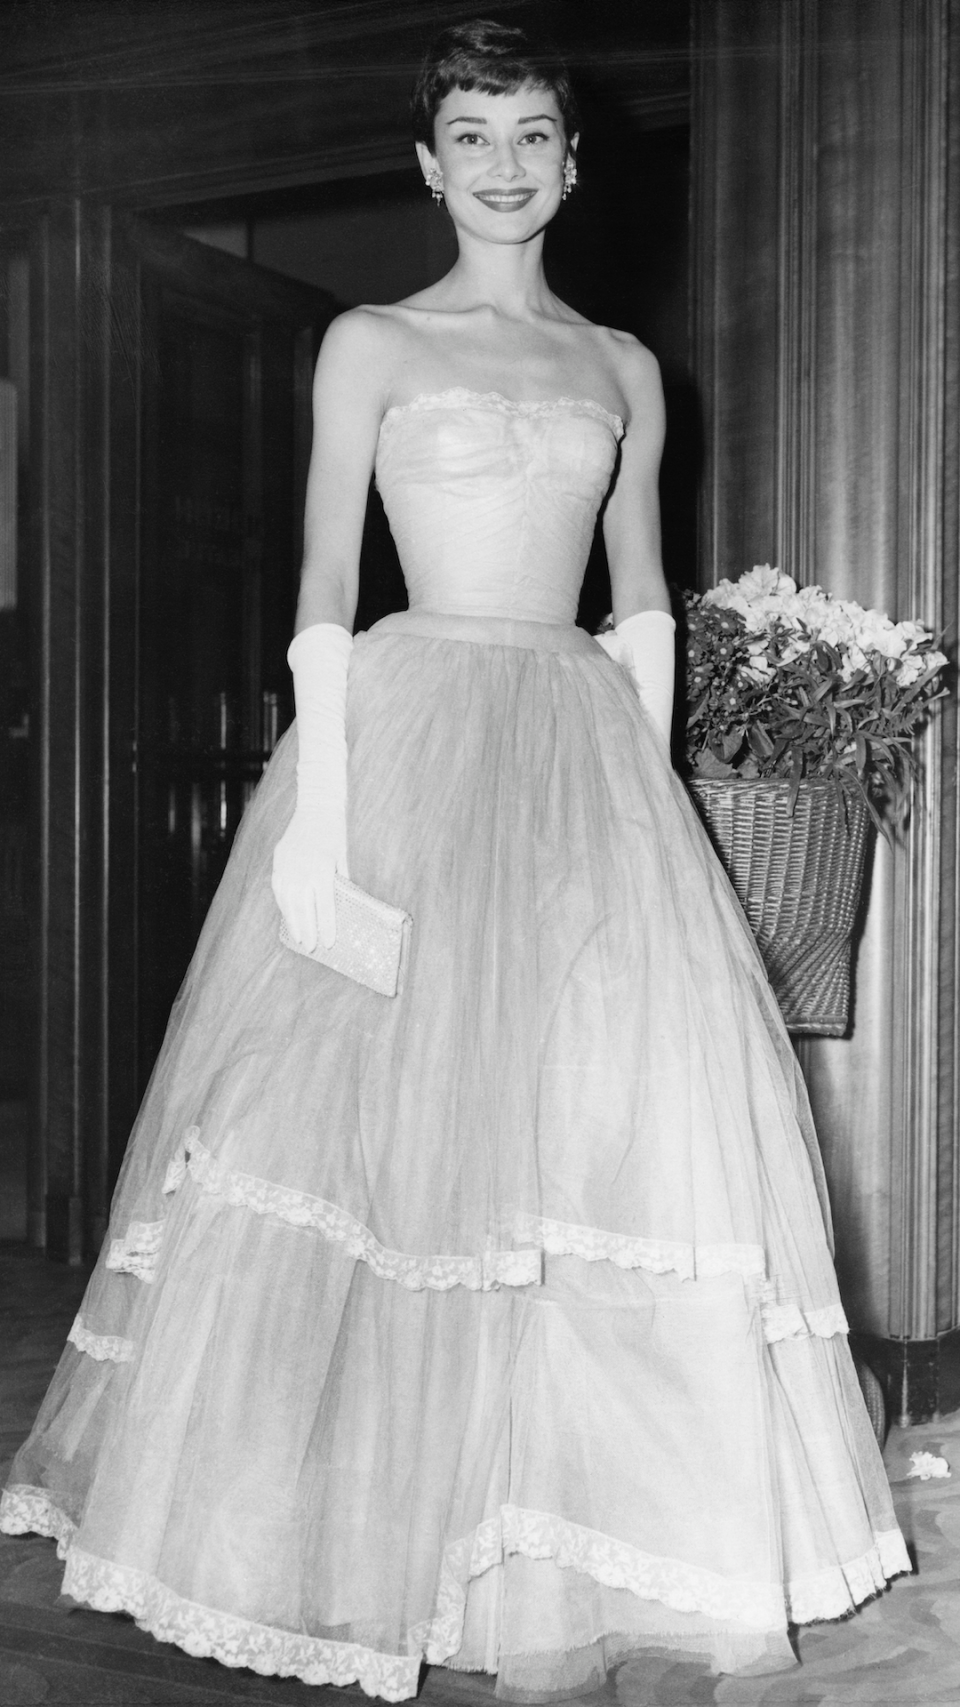 Audrey Hepburn at the British Film Academy Awards & Gala Premiere of 'As Long As They're Happy', held on 10 March 1955 at the Odeon Theatre Leicester Square